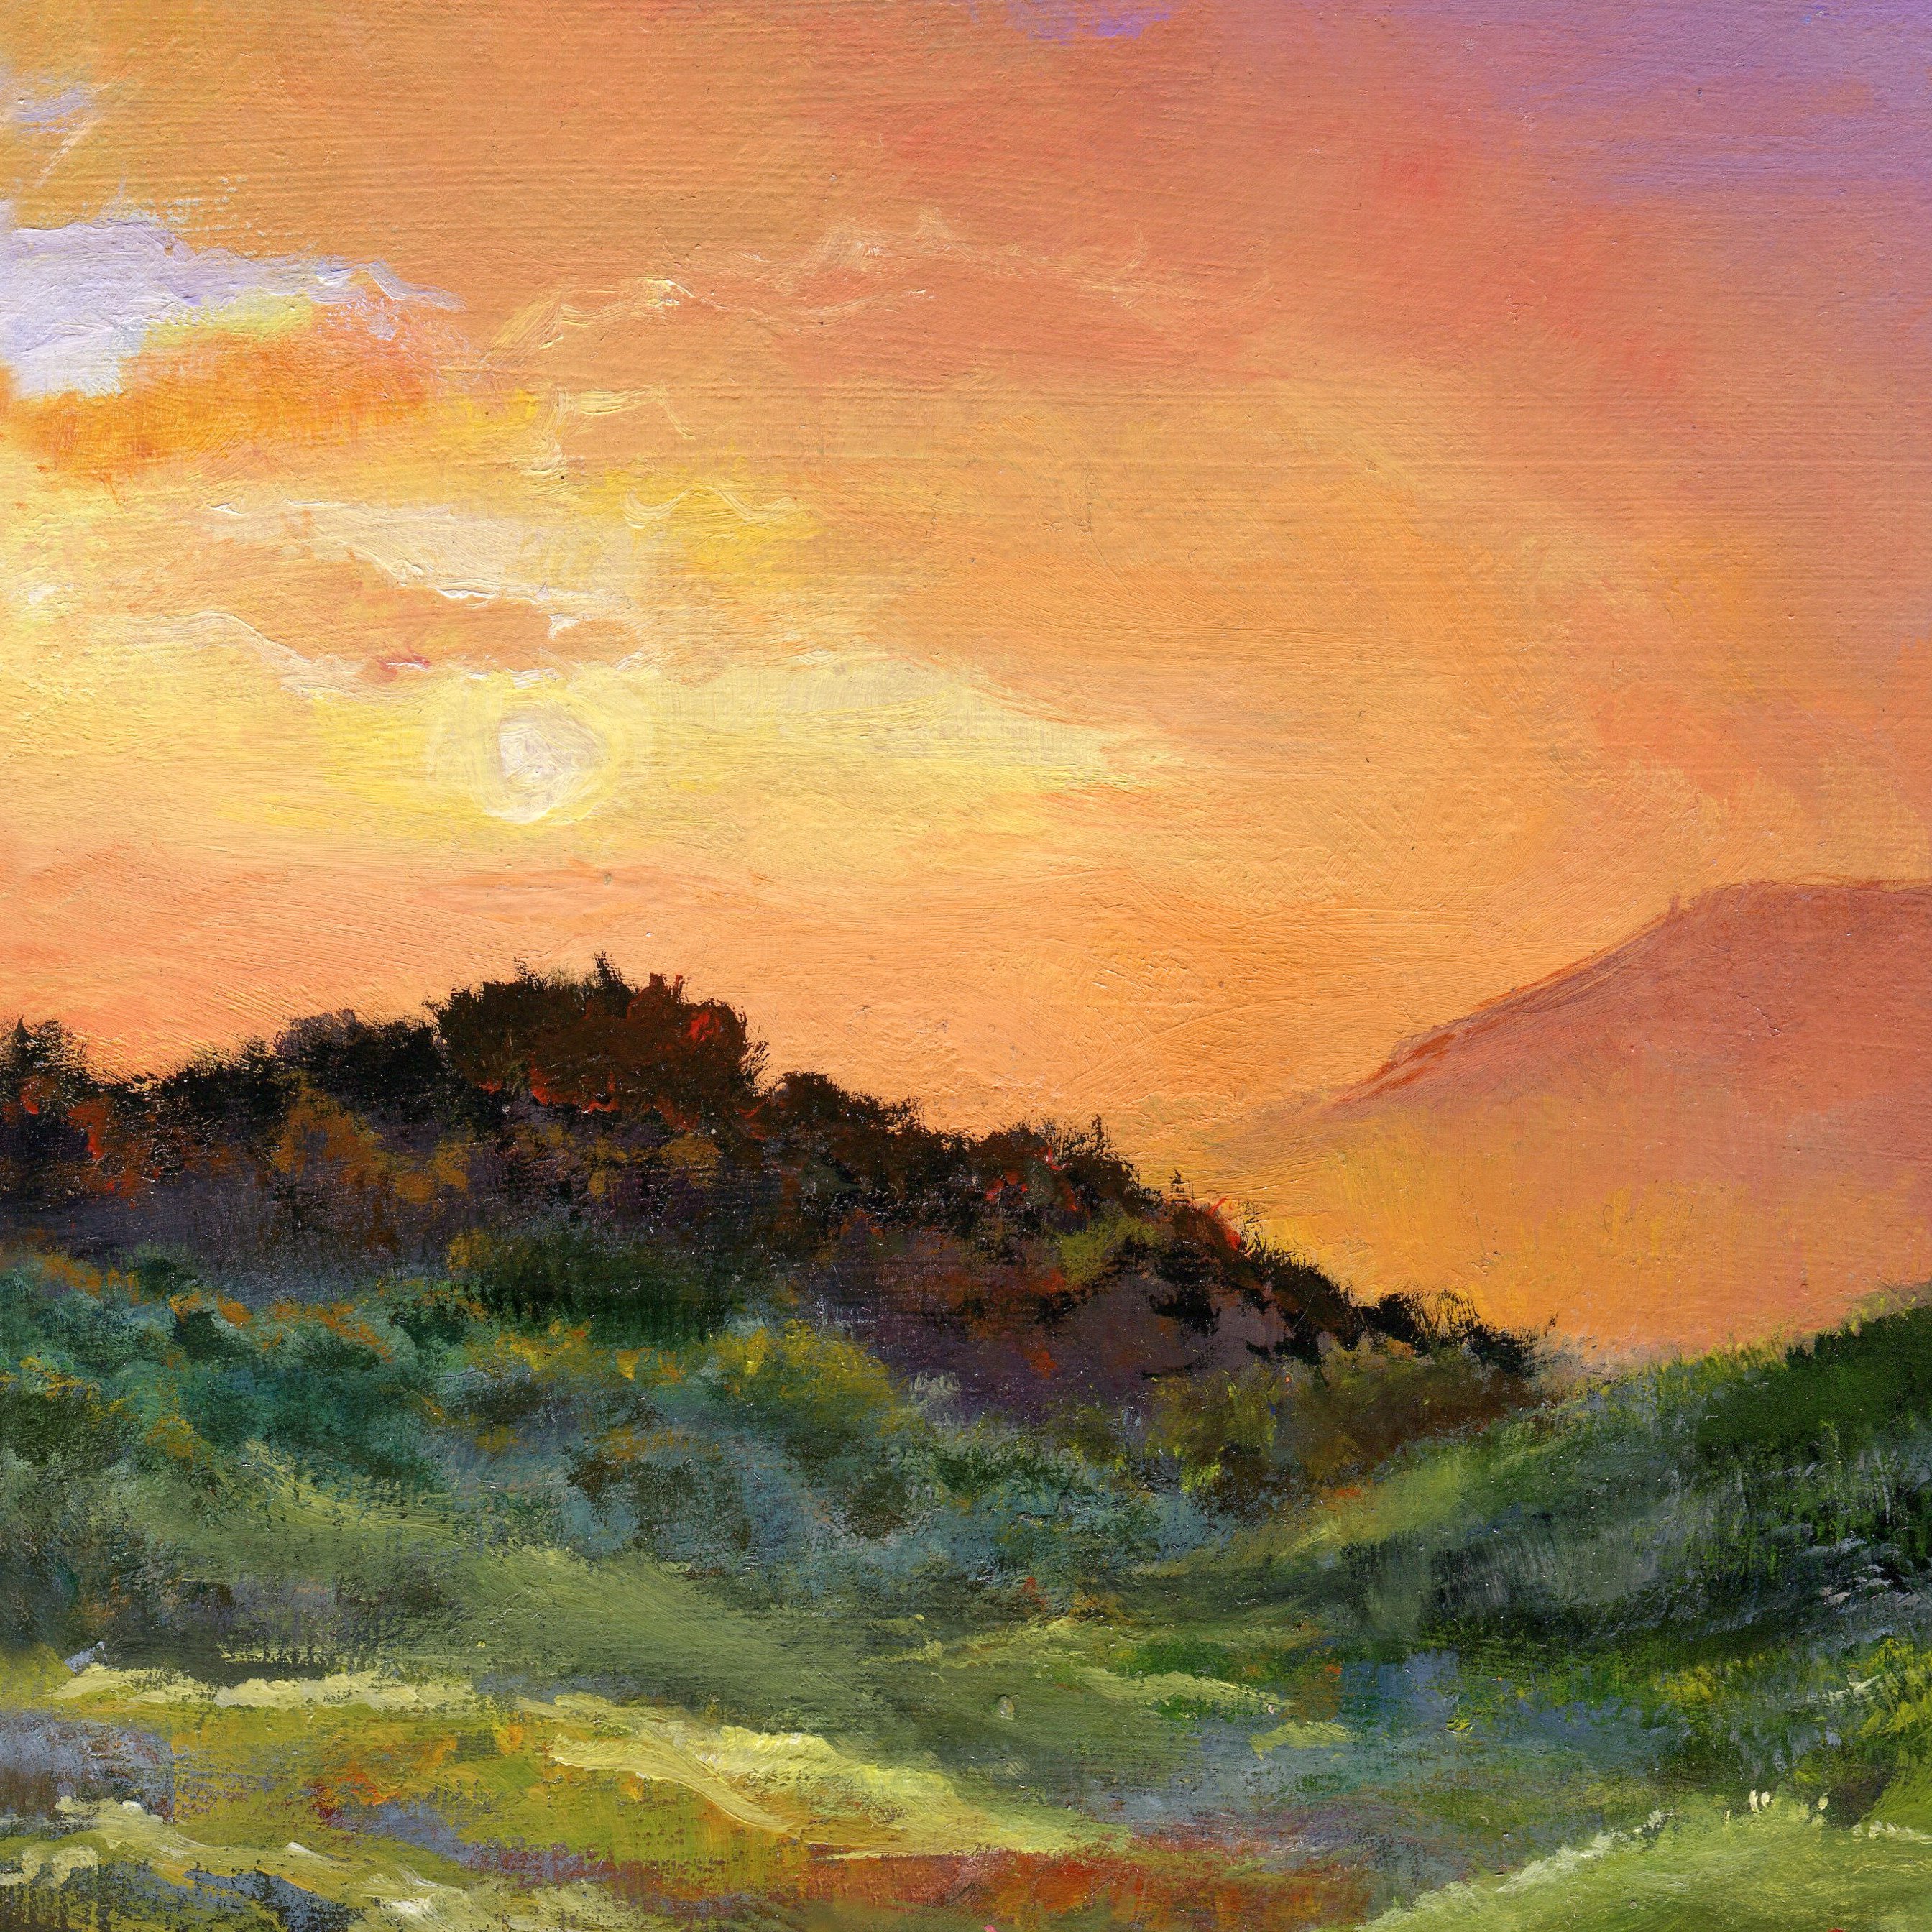 Hills with flowers at sunset Oil painting by Lucia Verdejo | Artfinder